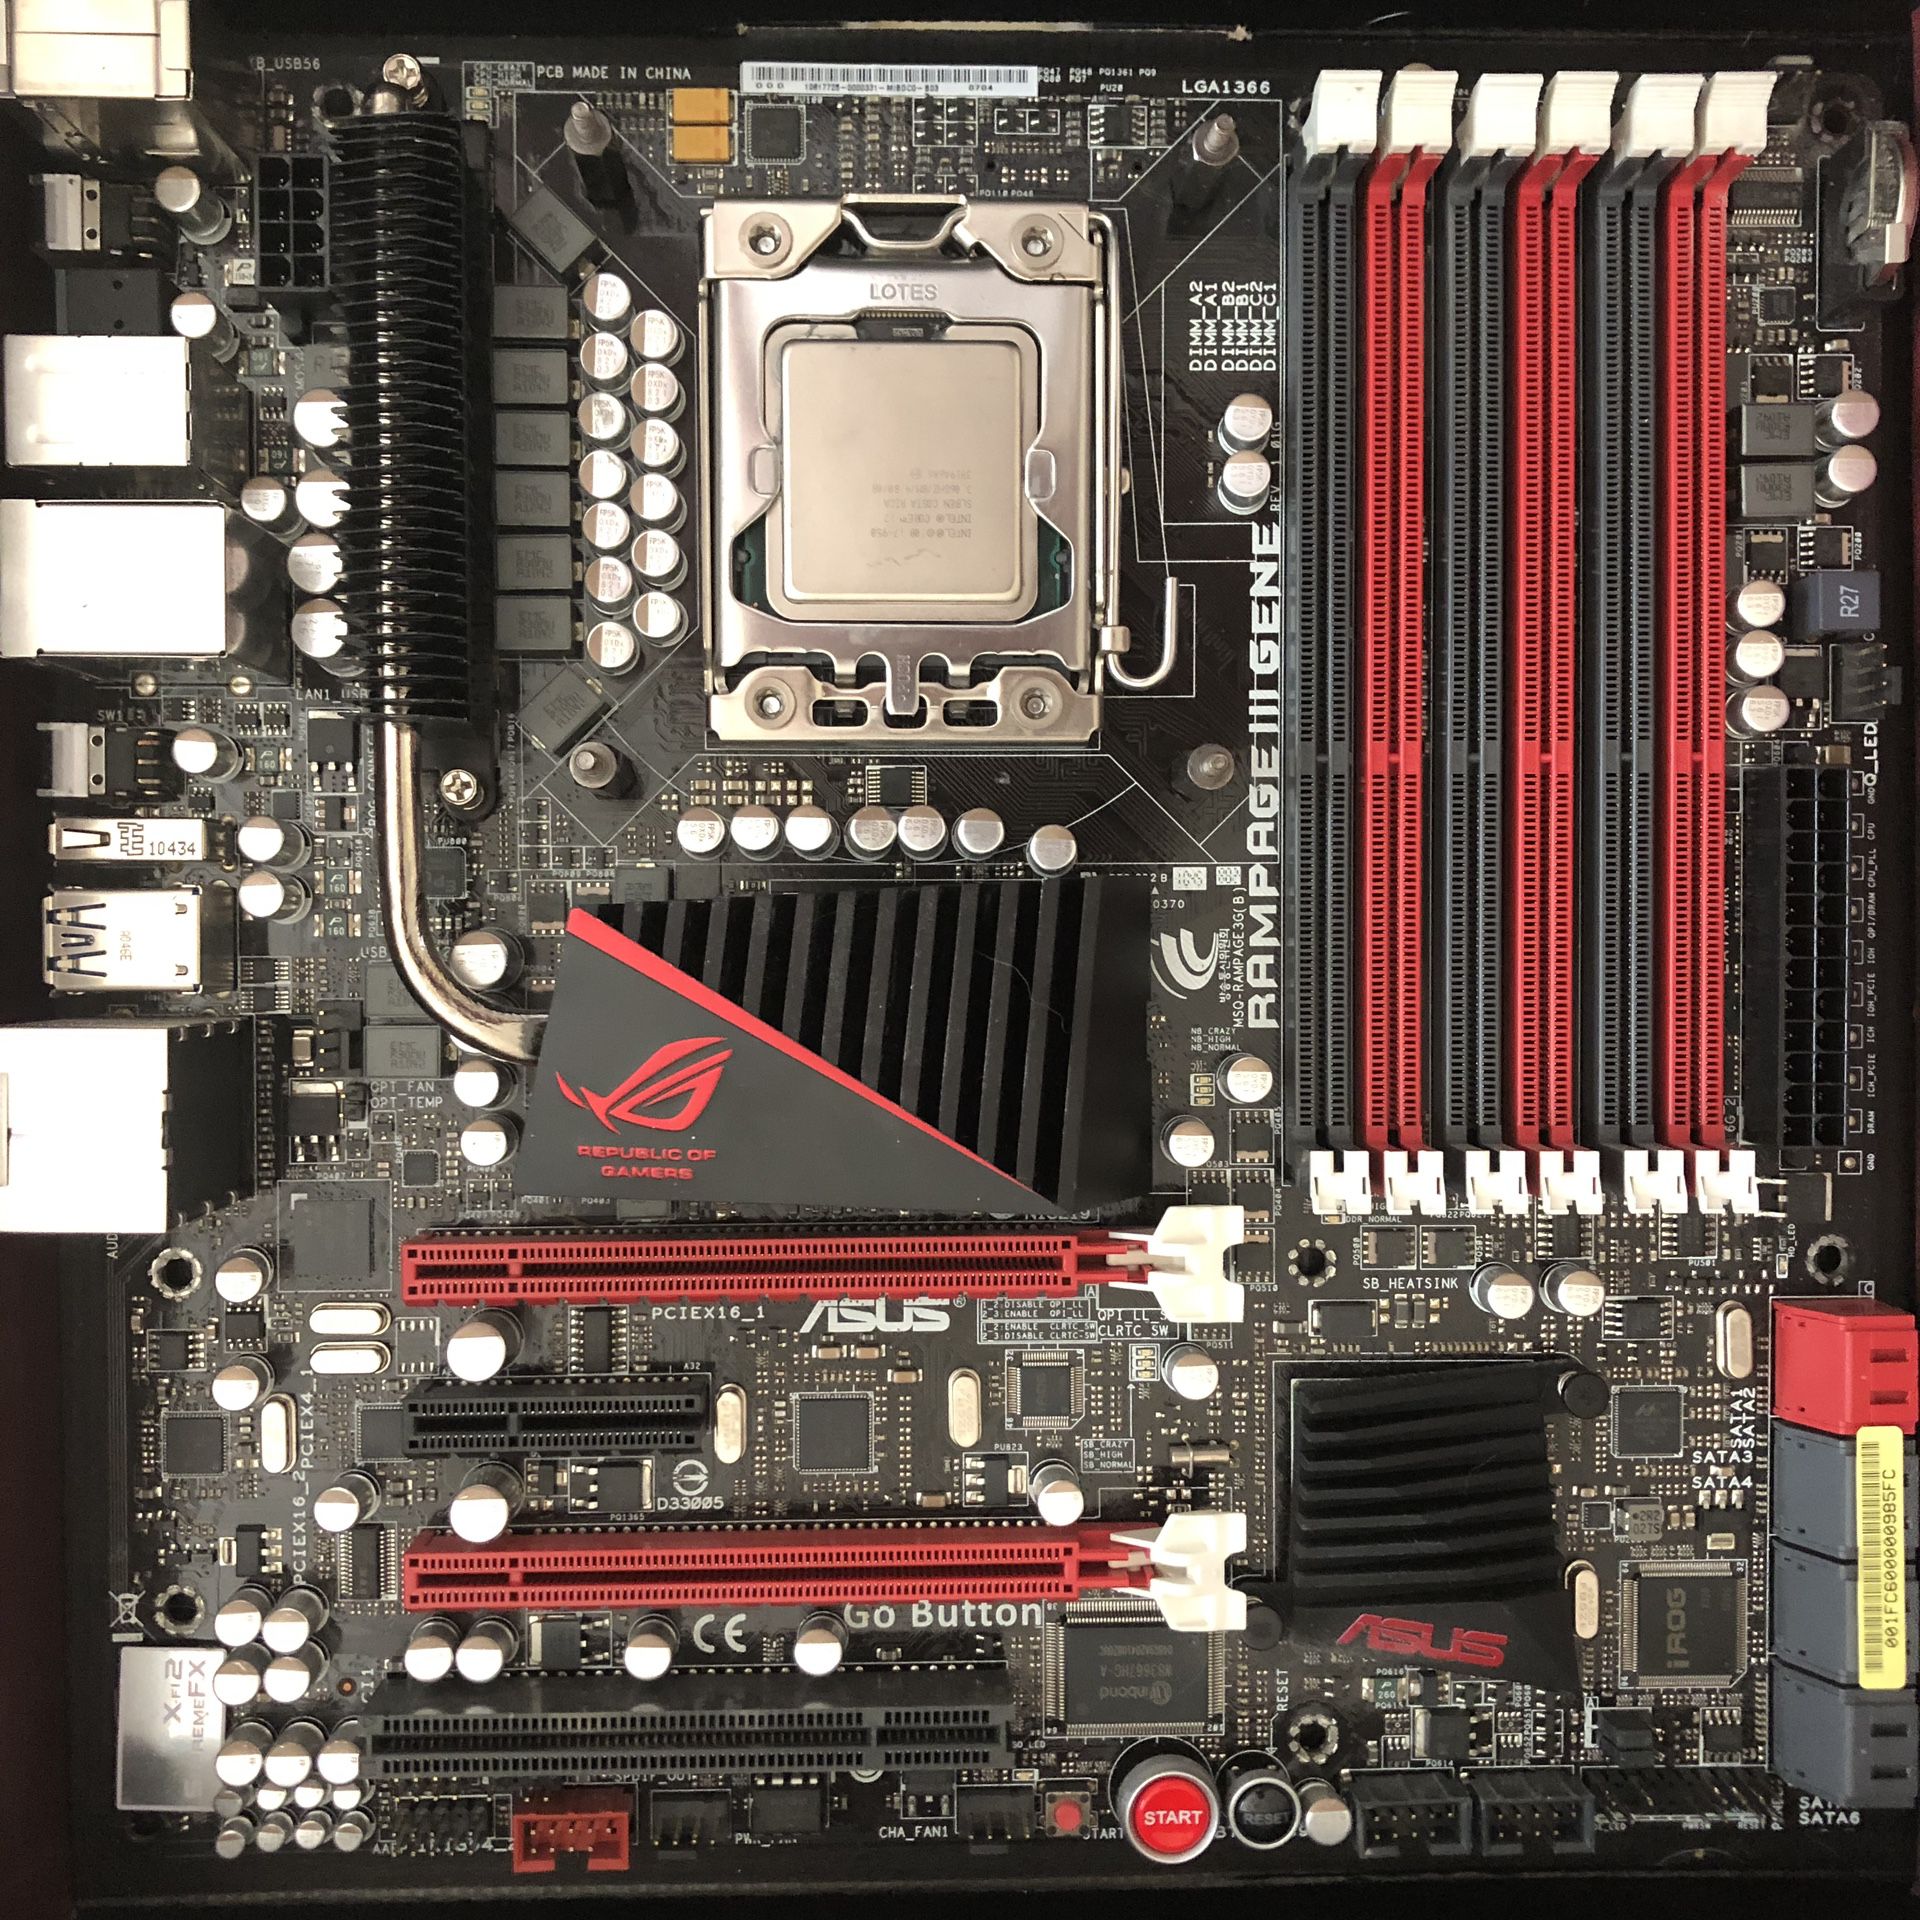 Asus Rampage 3 Motherboard and i7-950 processor